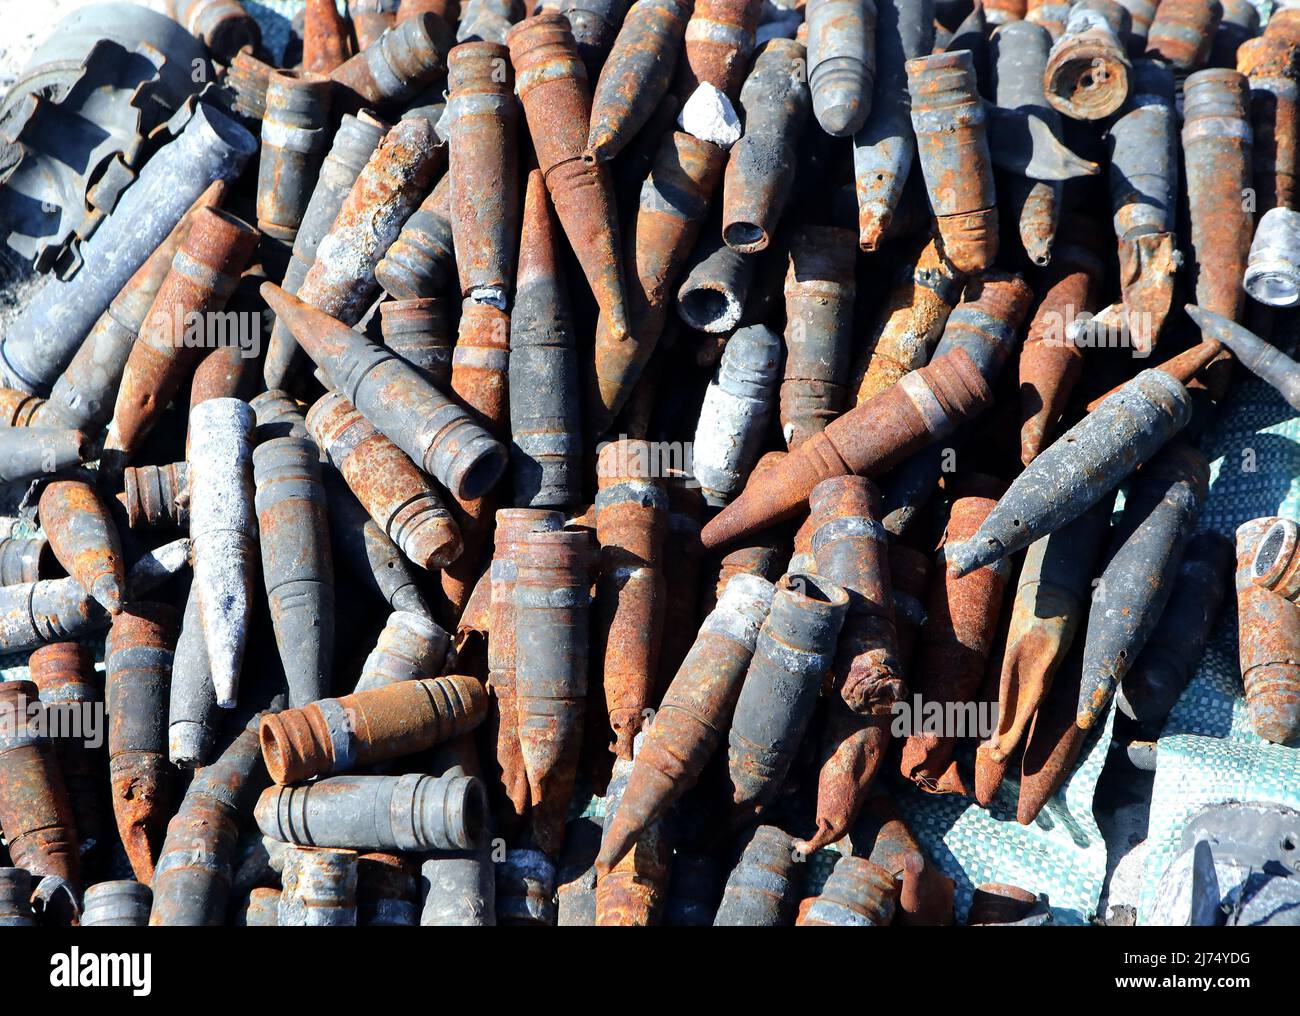 KYIV REGION, UKRAINE - MAY 5, 2022 - Ammunition is pictured on the premises of Antonov Airport, an international cargo airport that became the site of Stock Photo